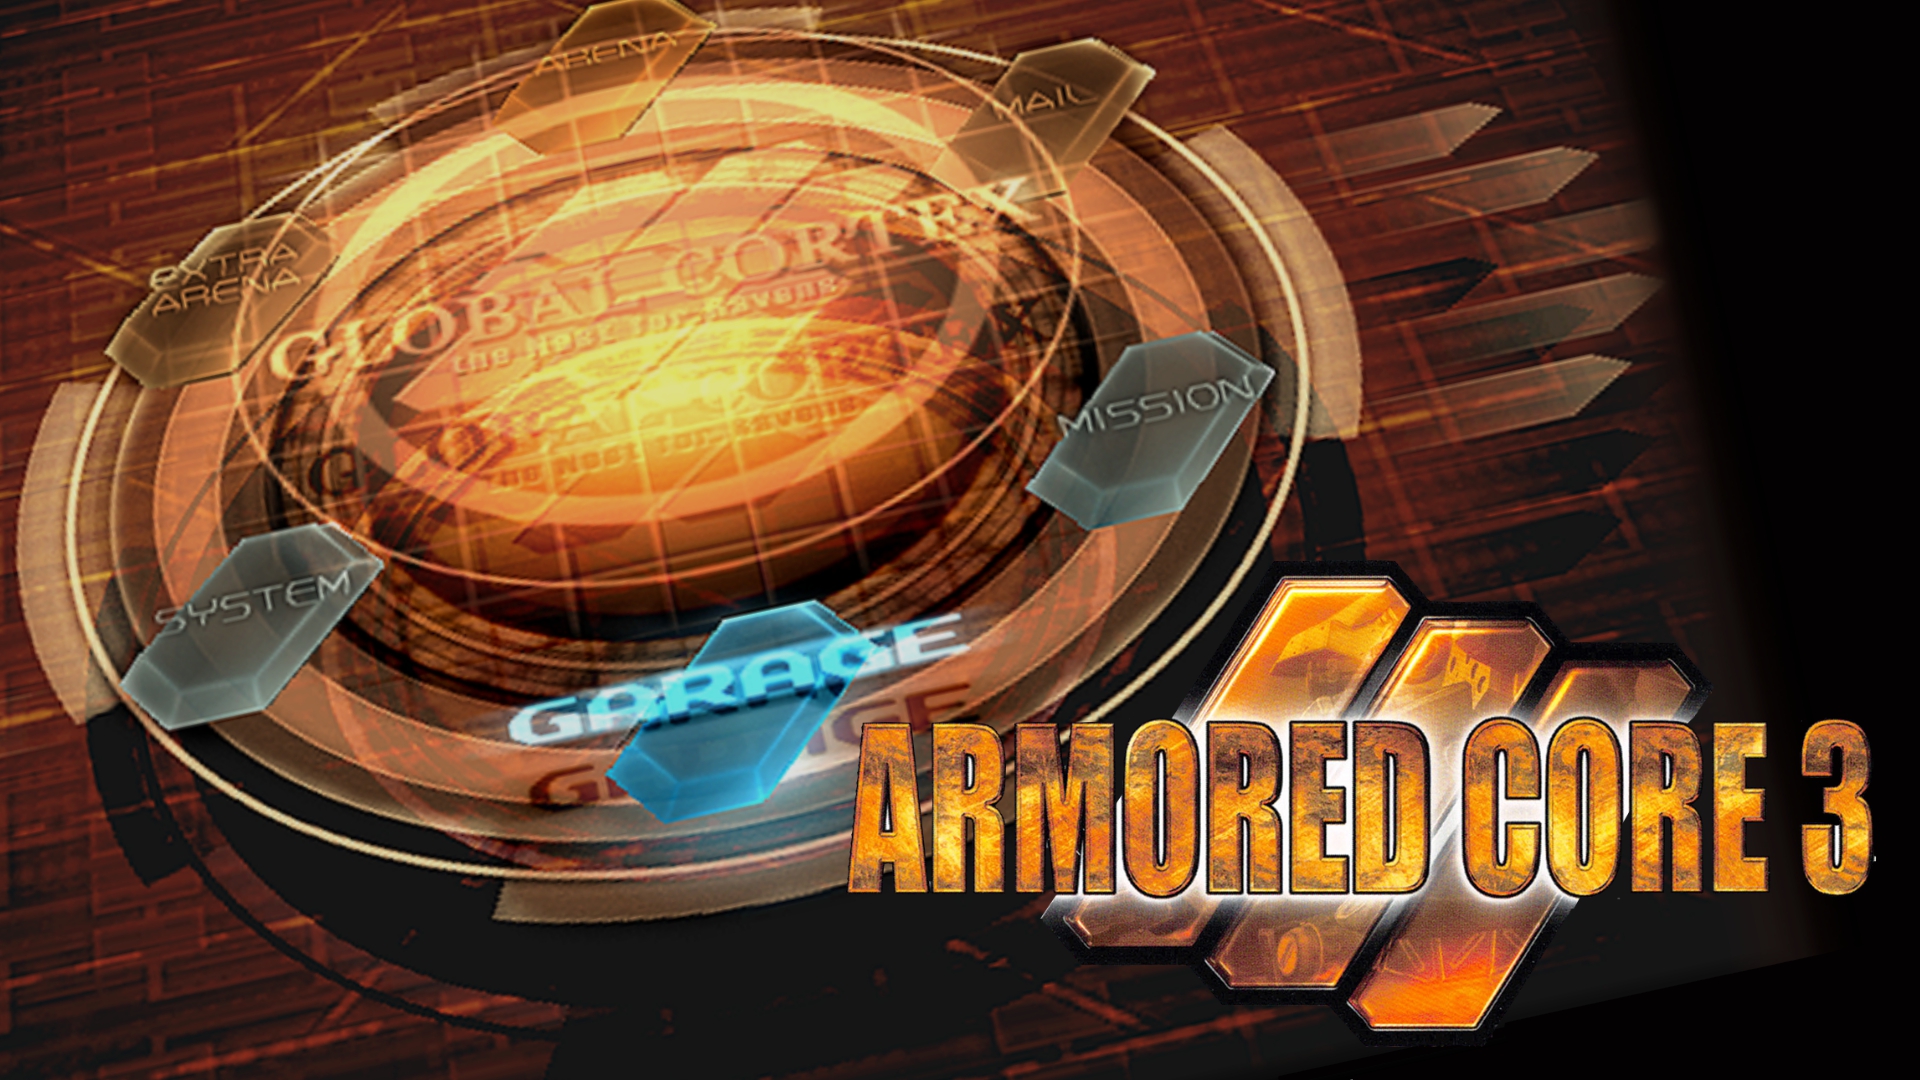 image of the raven's nest in armored core 3 silent line, a circular futuristic digital hub for mail, arena, extra arena, system, garage, and mission - the middle has the text 'global cortex, the nest for ravens.' to the side is the logo for armored core 3.